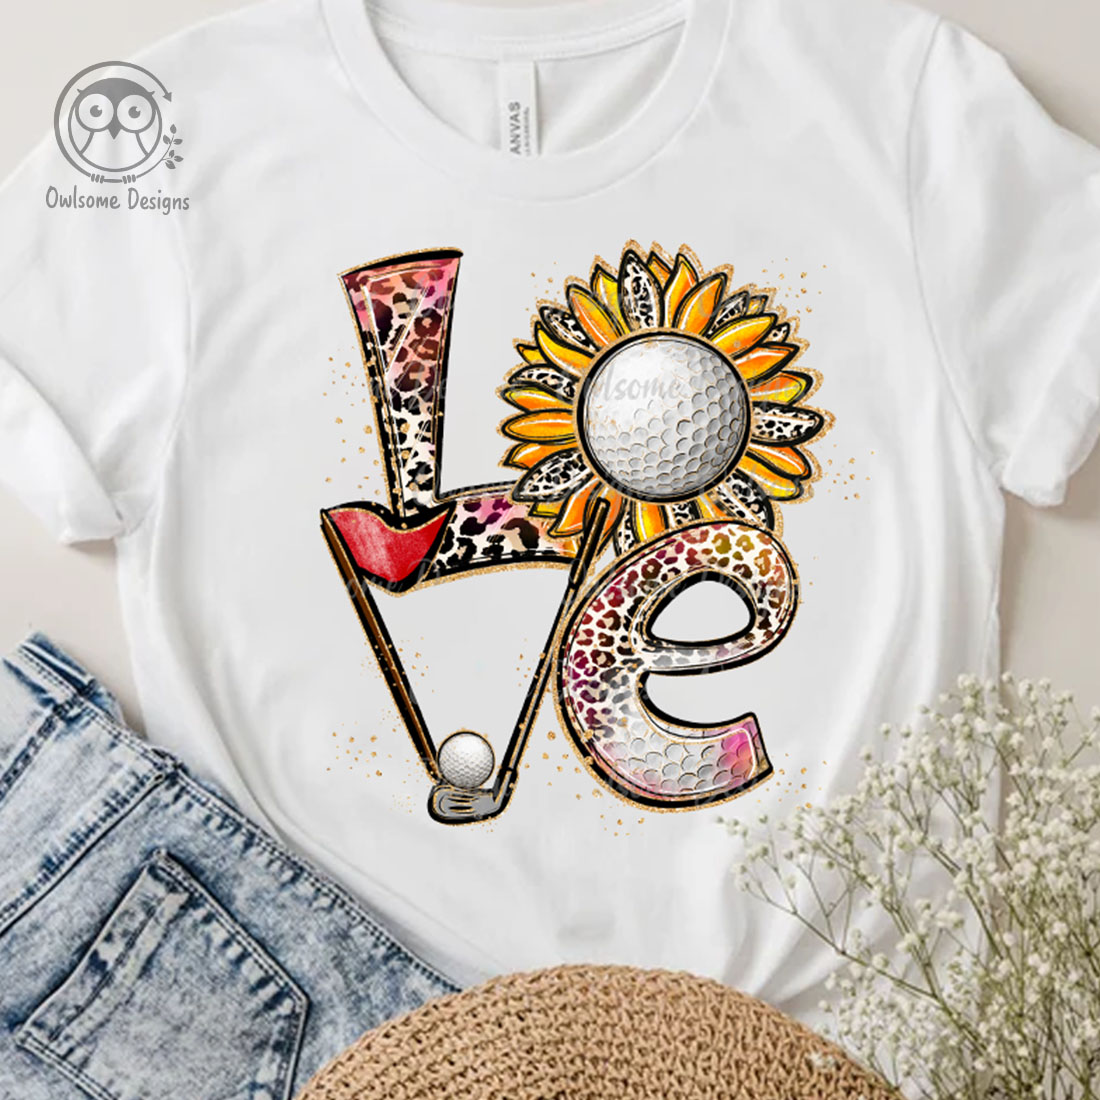 T-shirt image with amazing inscription Love with golf elements.